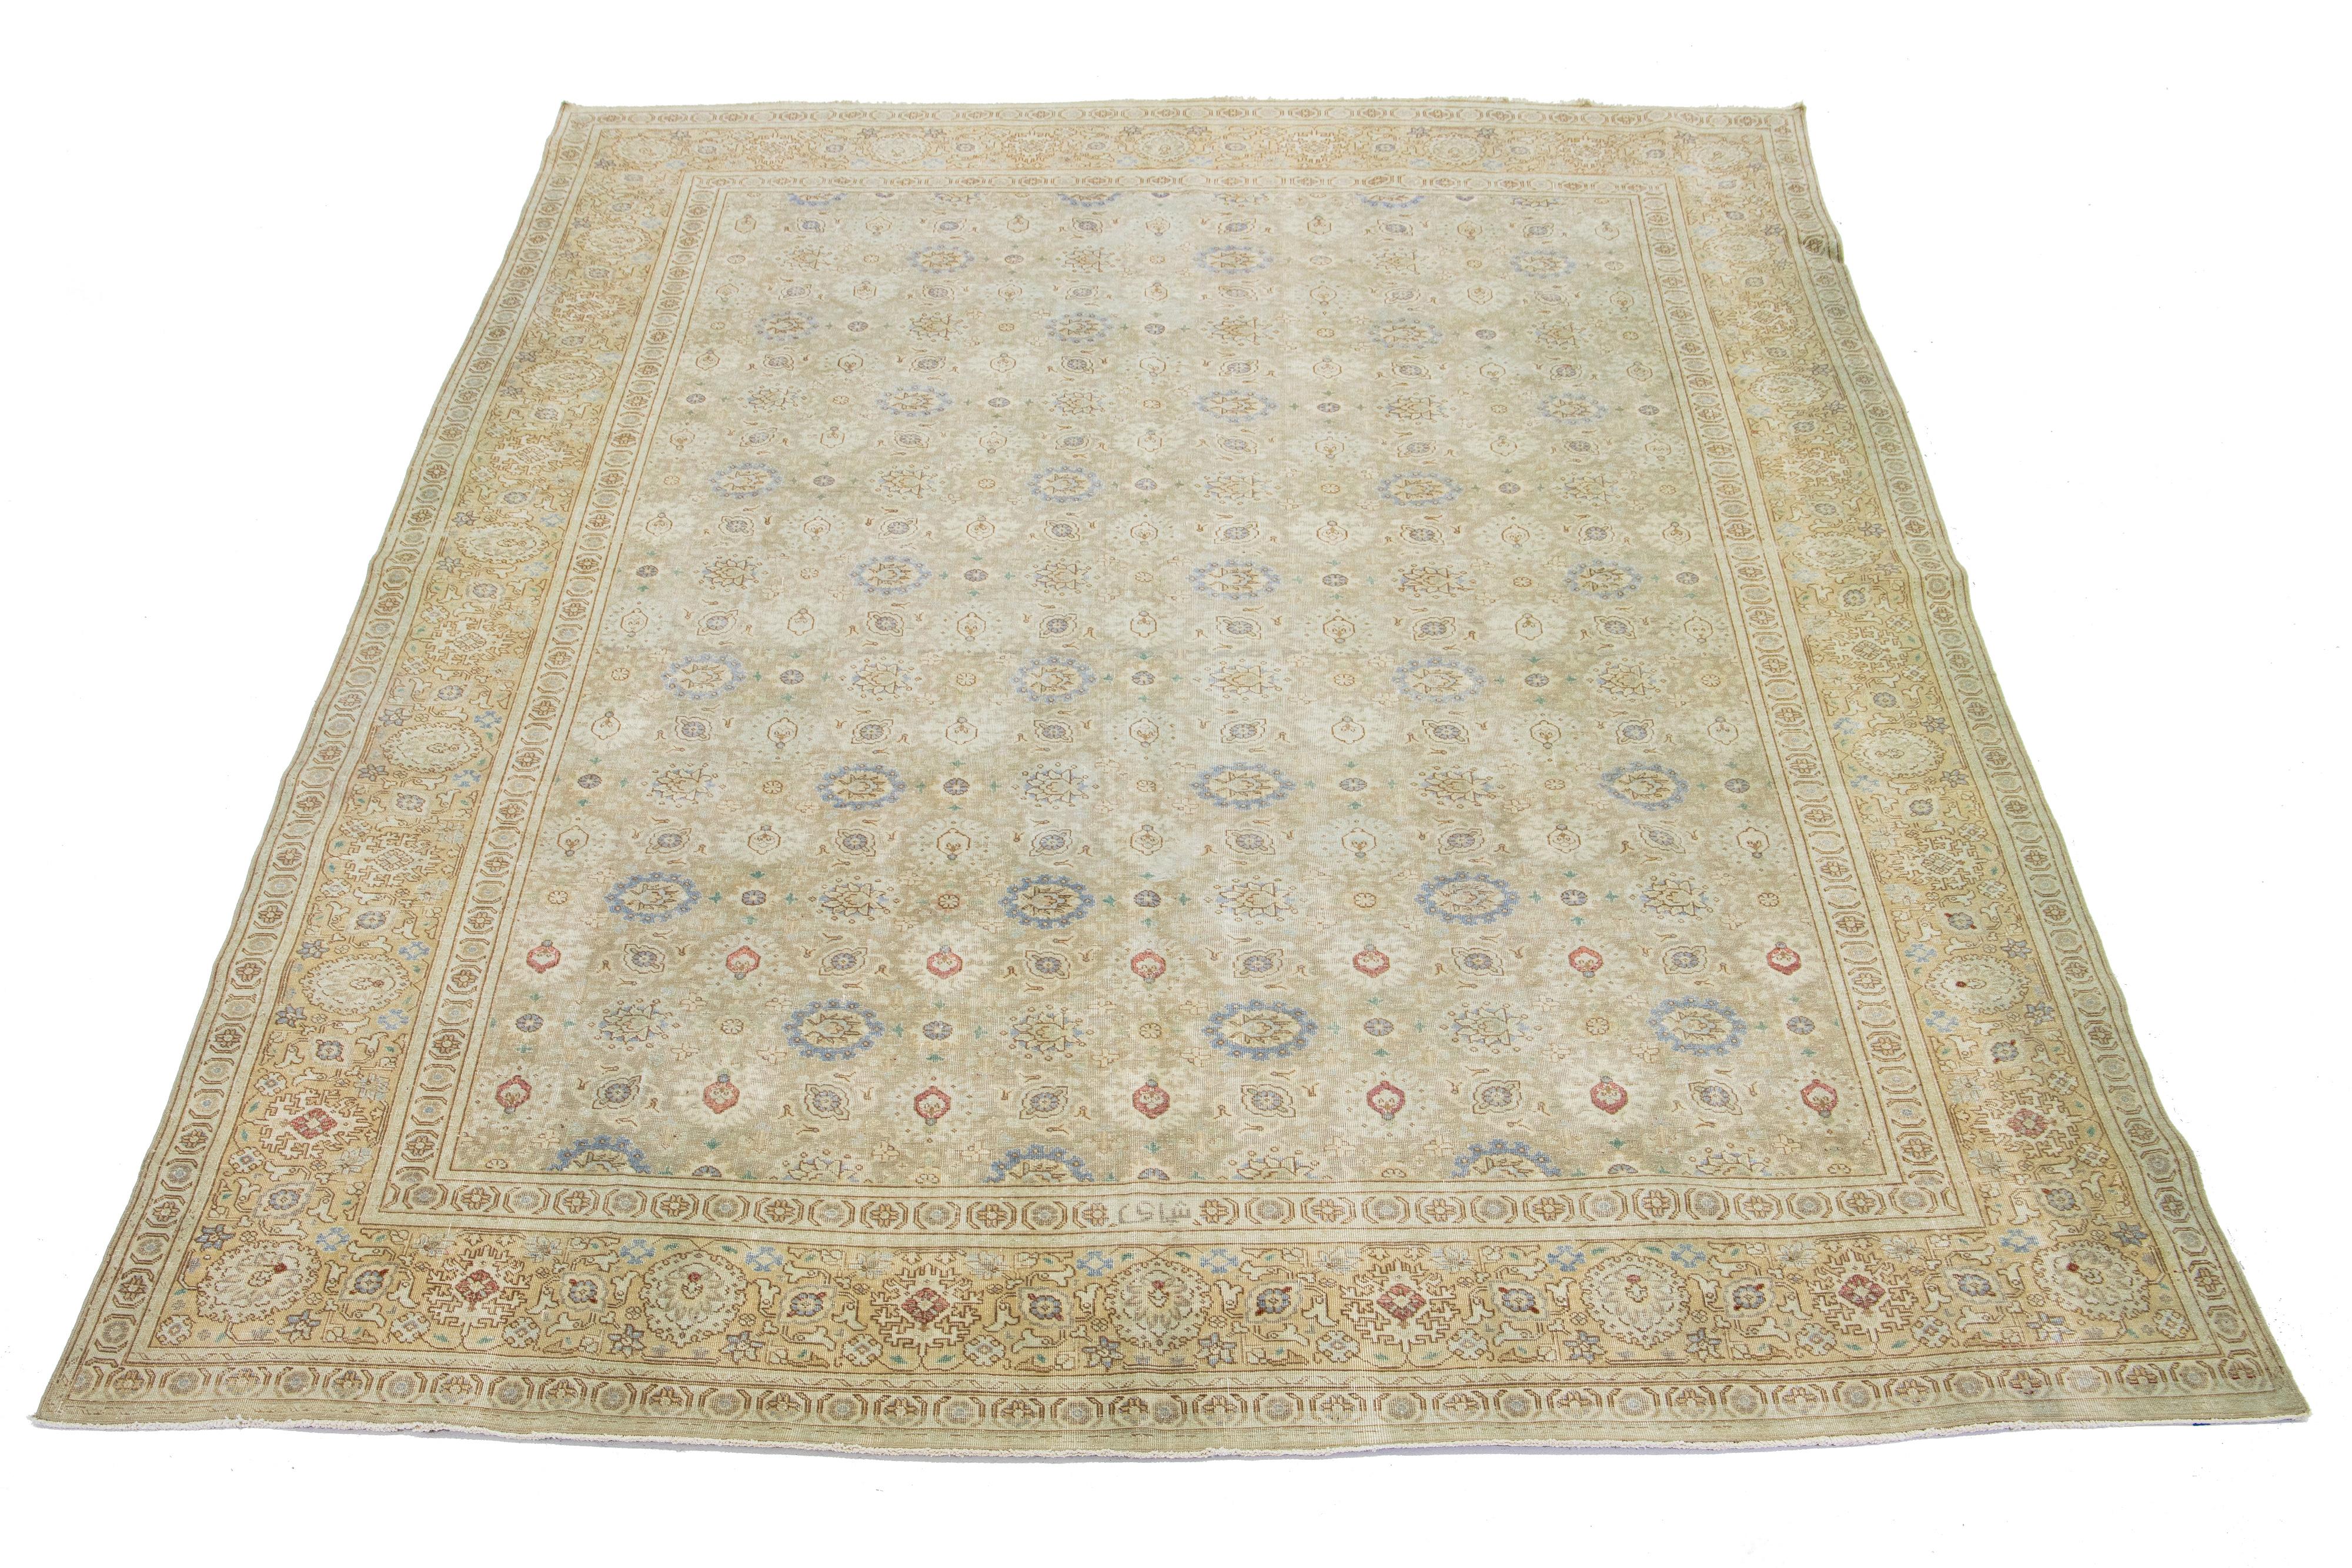 A Persian Tabriz wool rug from the 1920s showcases a handcrafted, traditional floral pattern. The design is accentuated by contrasting colors such as beige, green, and blue in the field.

This rug measures 9'4